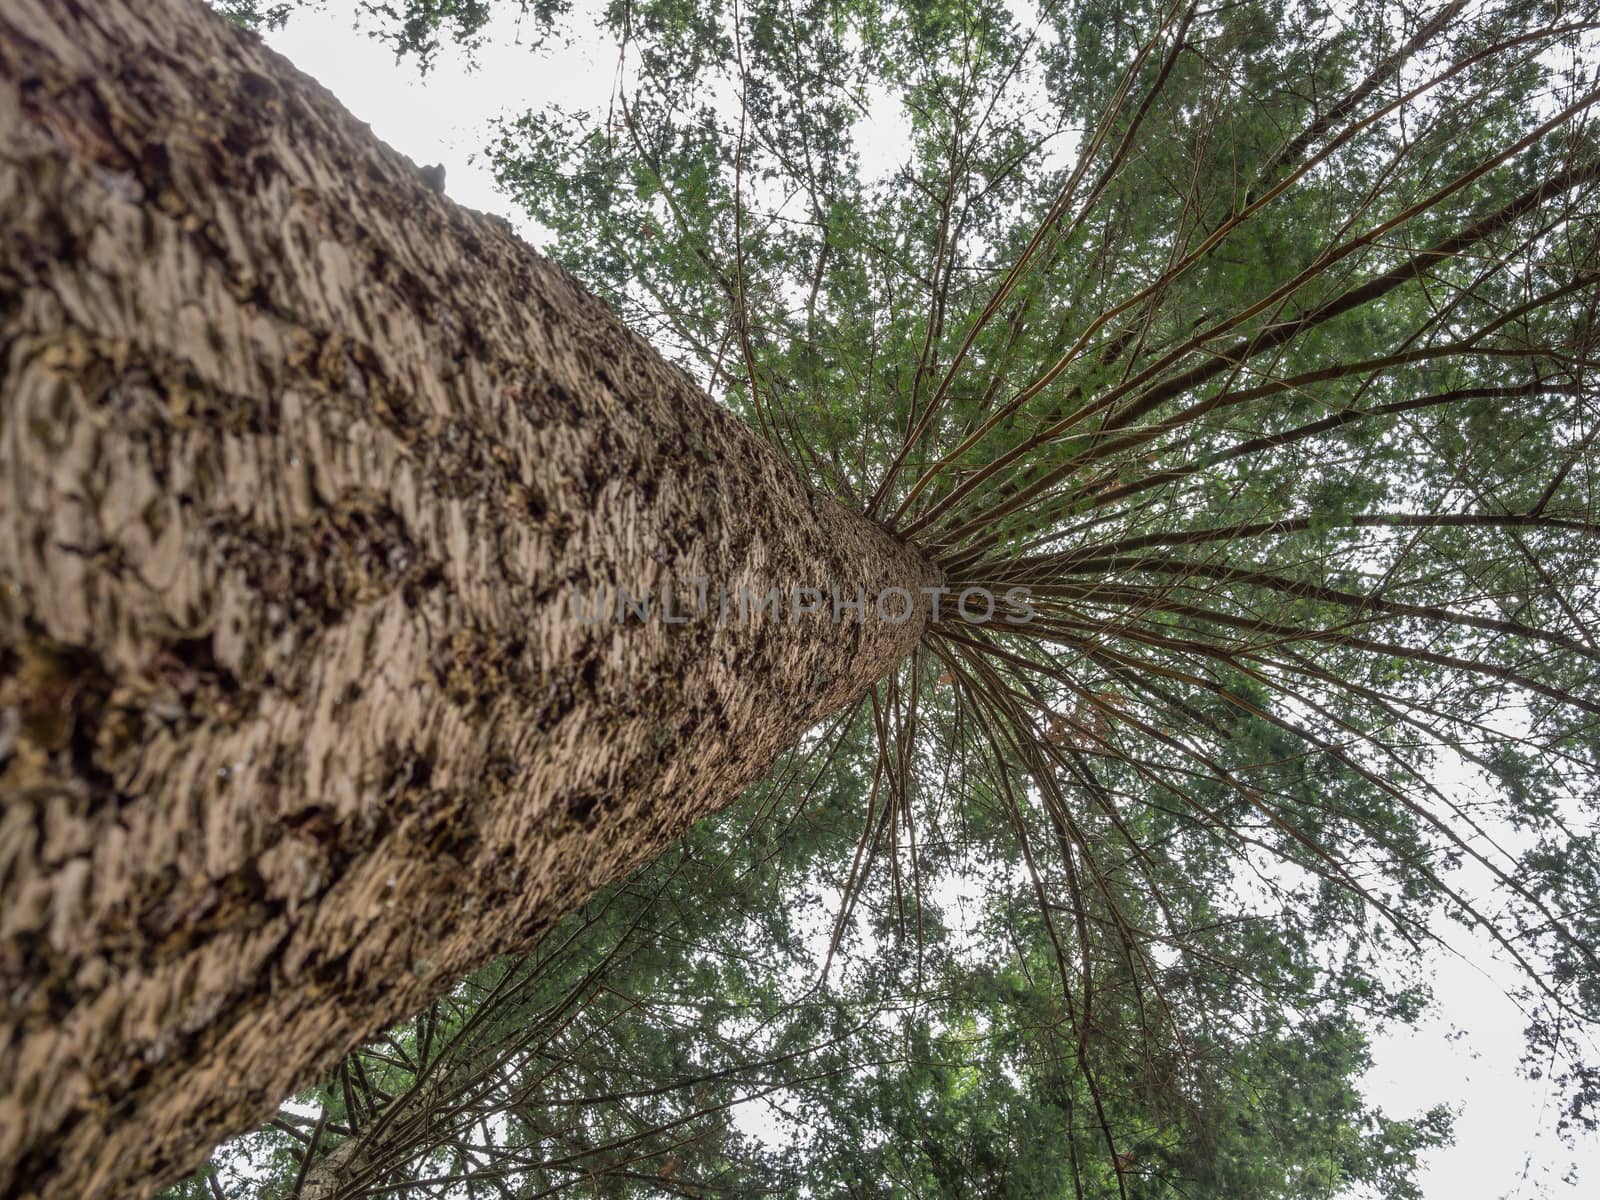 Looking up at the cloudy sky along the trunk of a large pine tree